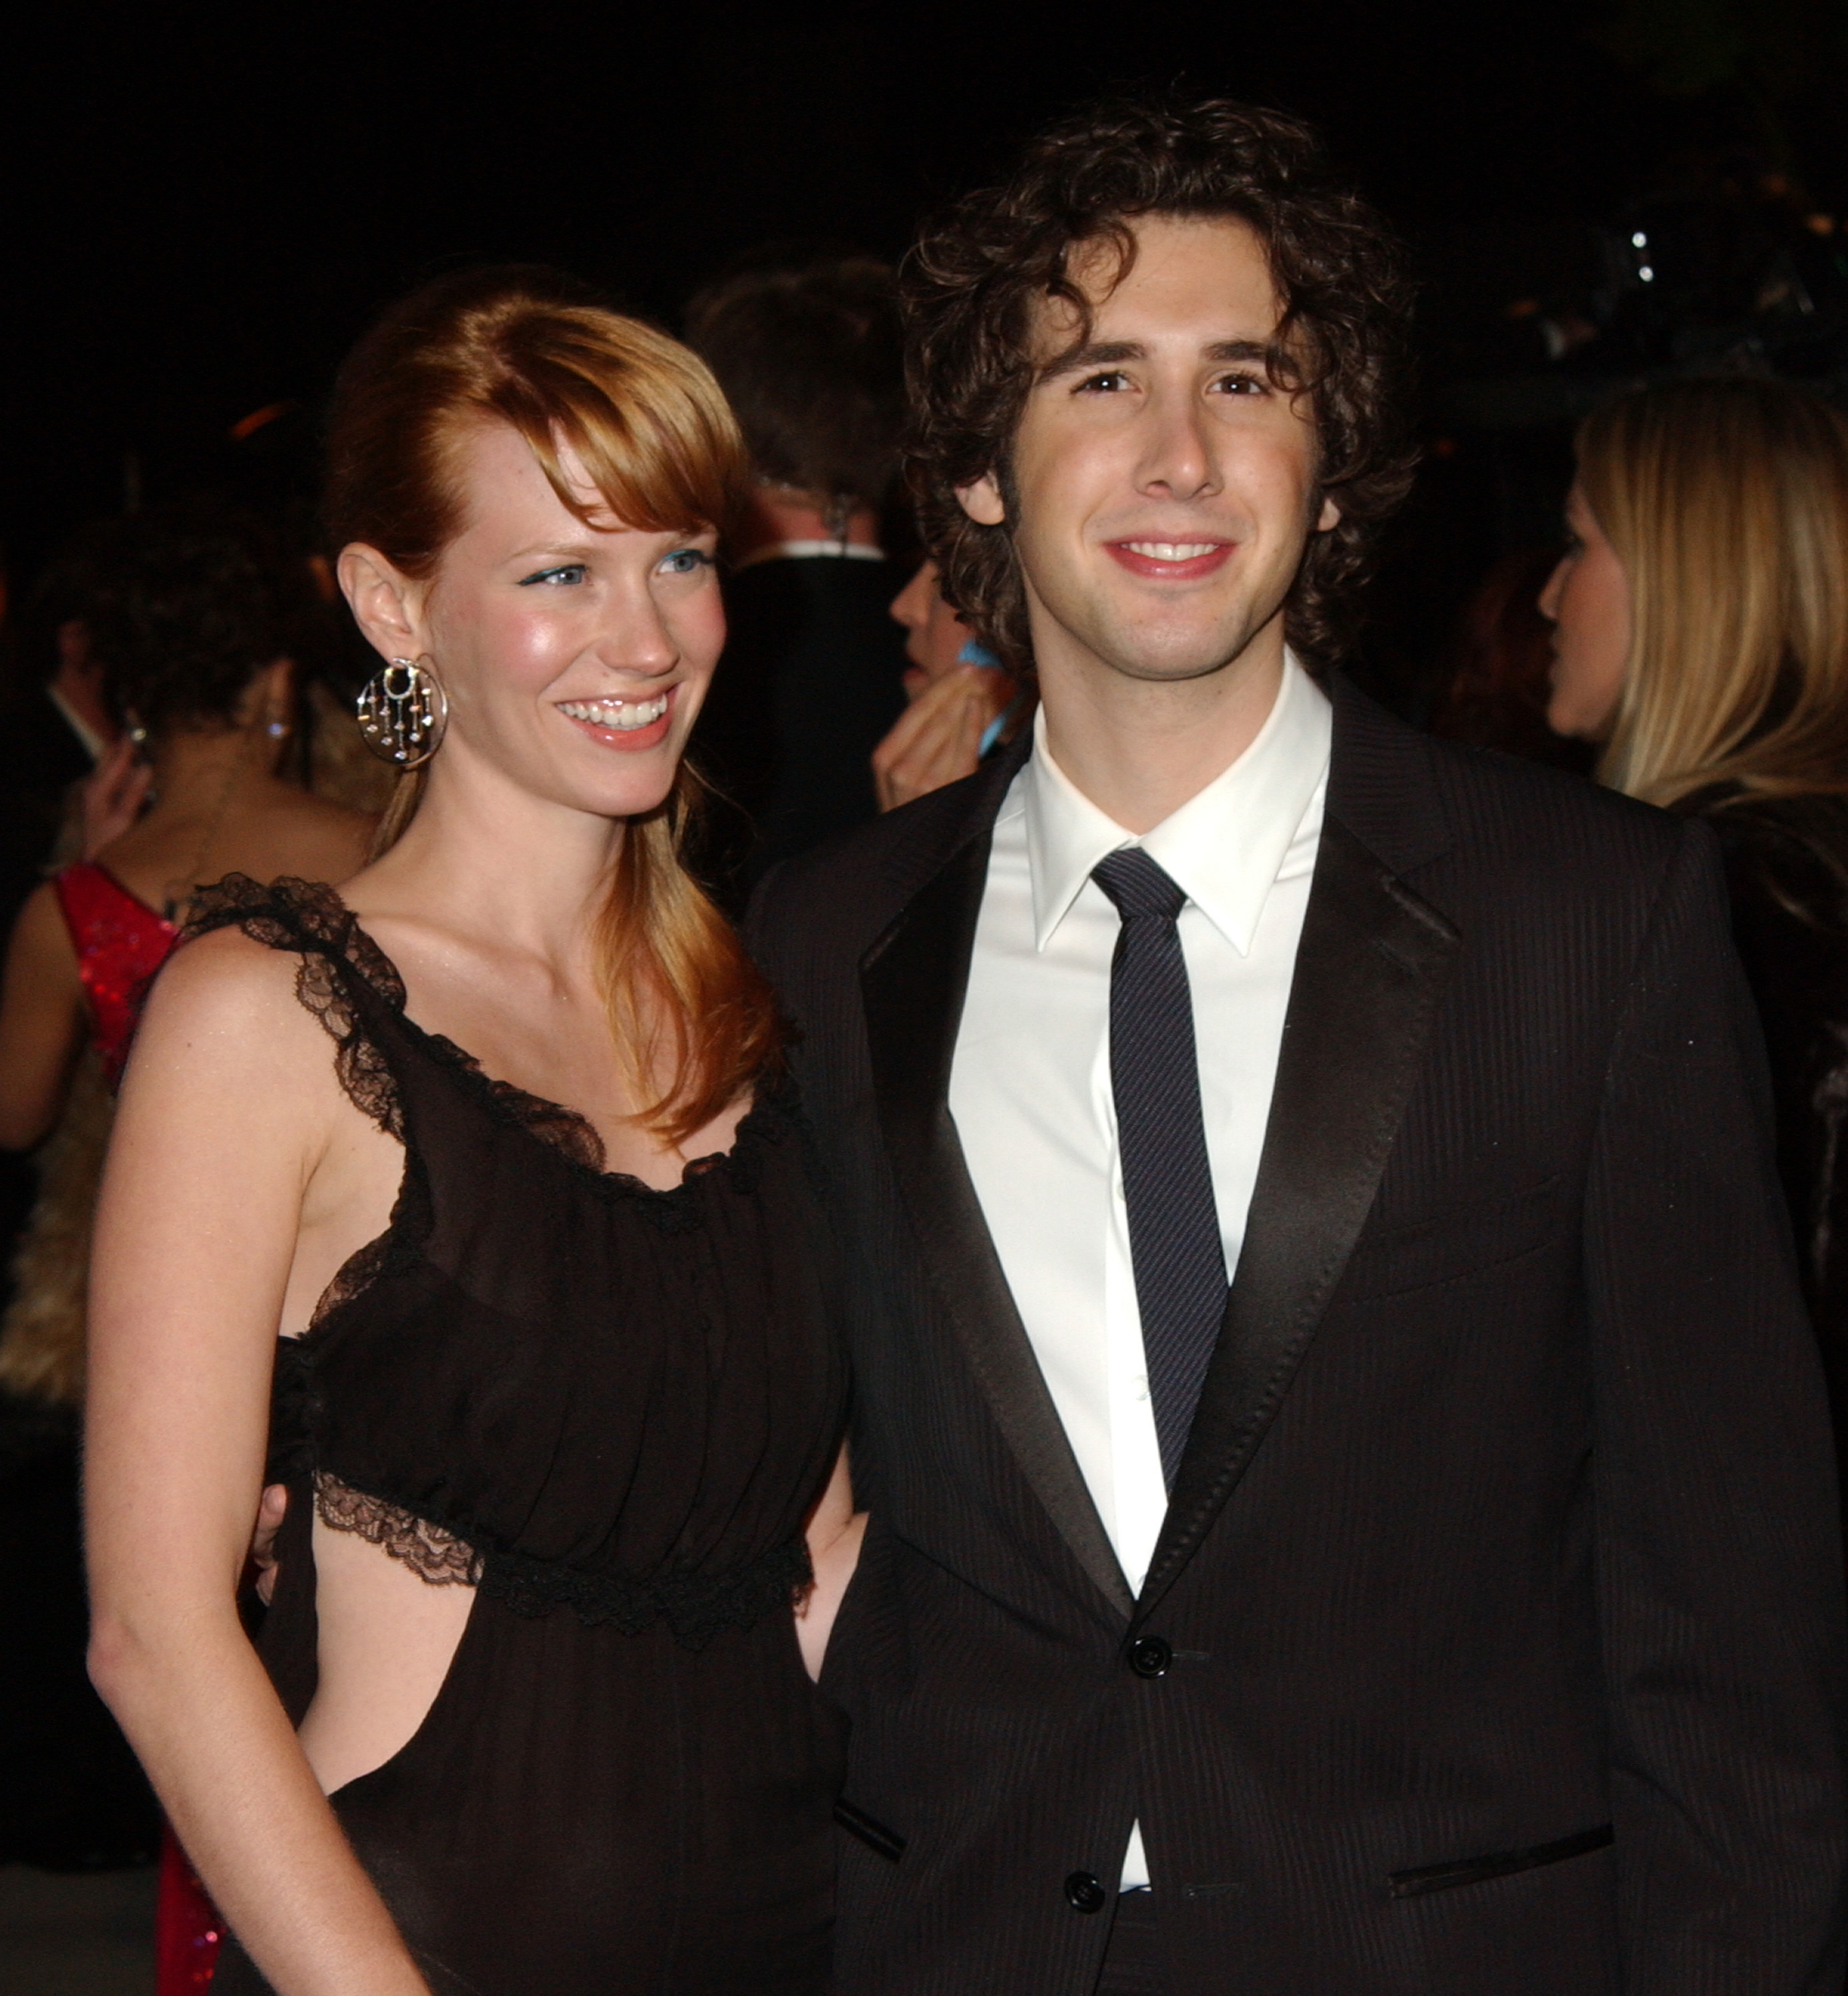 January Jones and Josh Groban during the 2005 Vanity Fair Oscar Party at Mortons on February 27, 2005, in Los Angeles, California. | Source: Getty Images